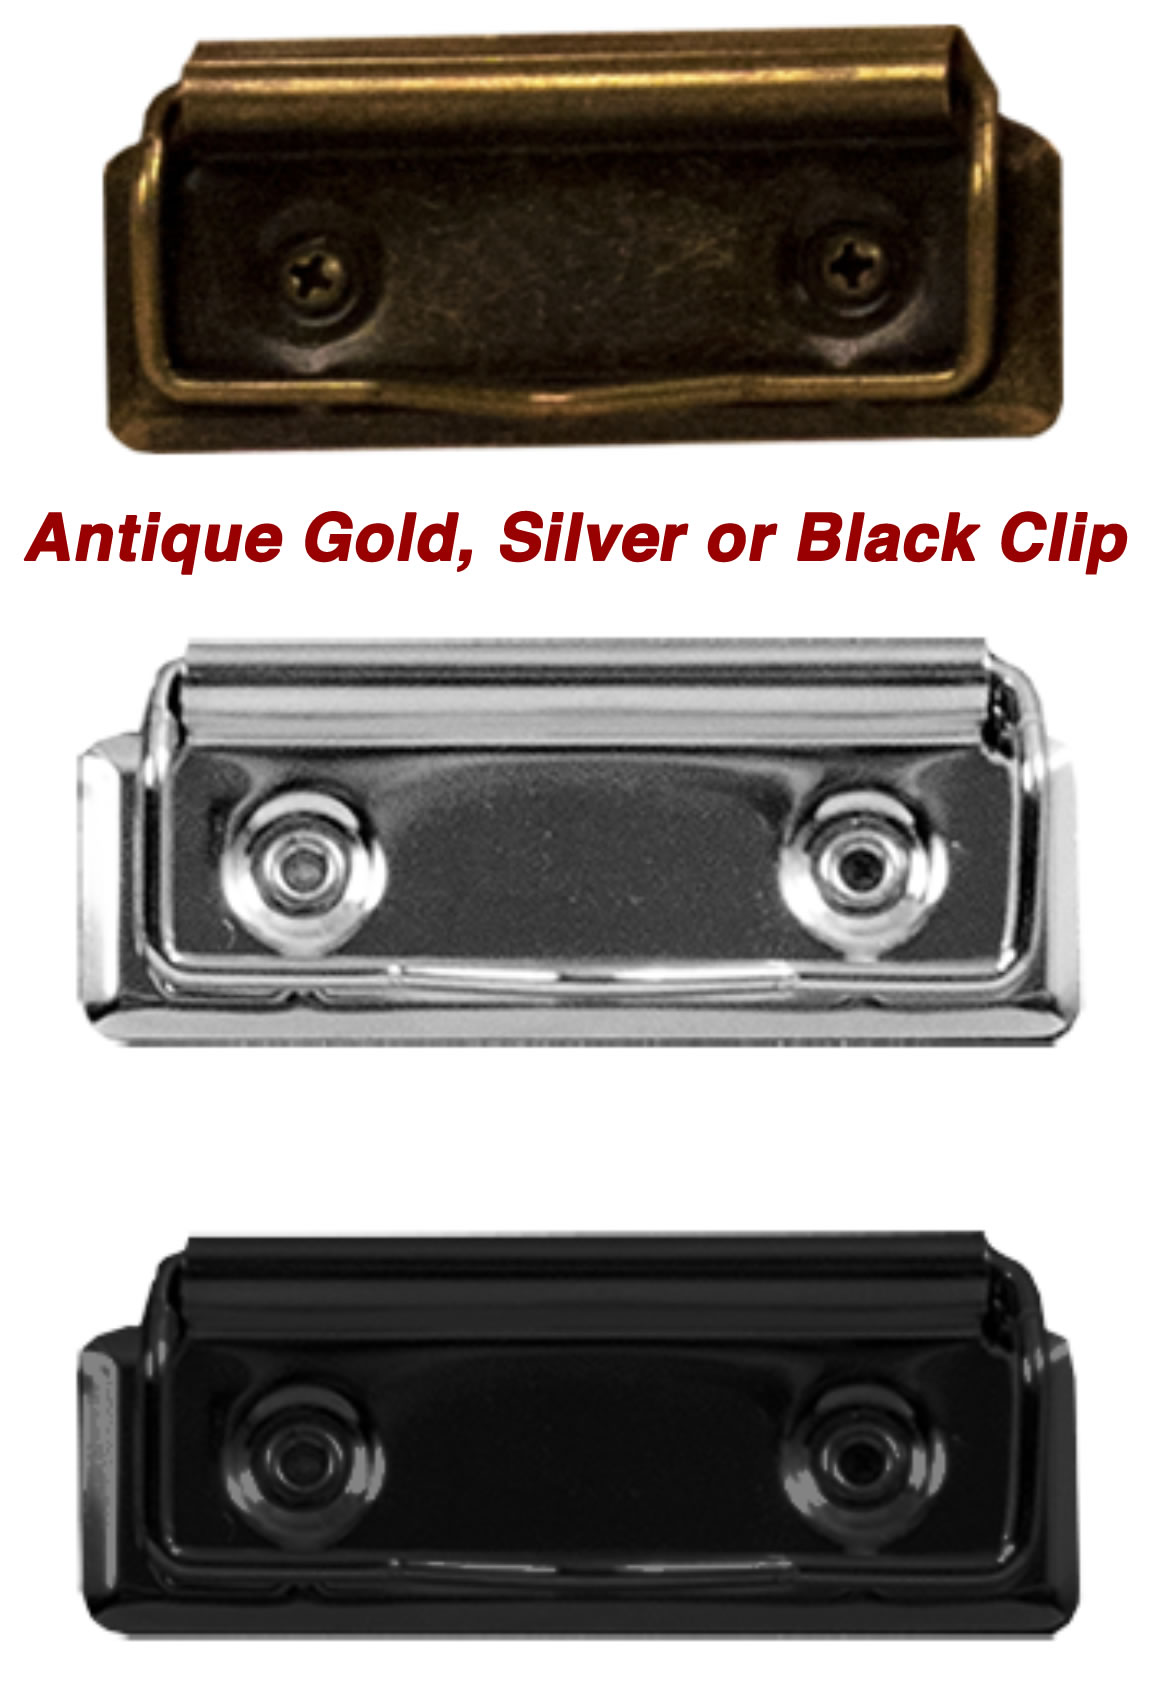 Antique gold, silver or black clips.